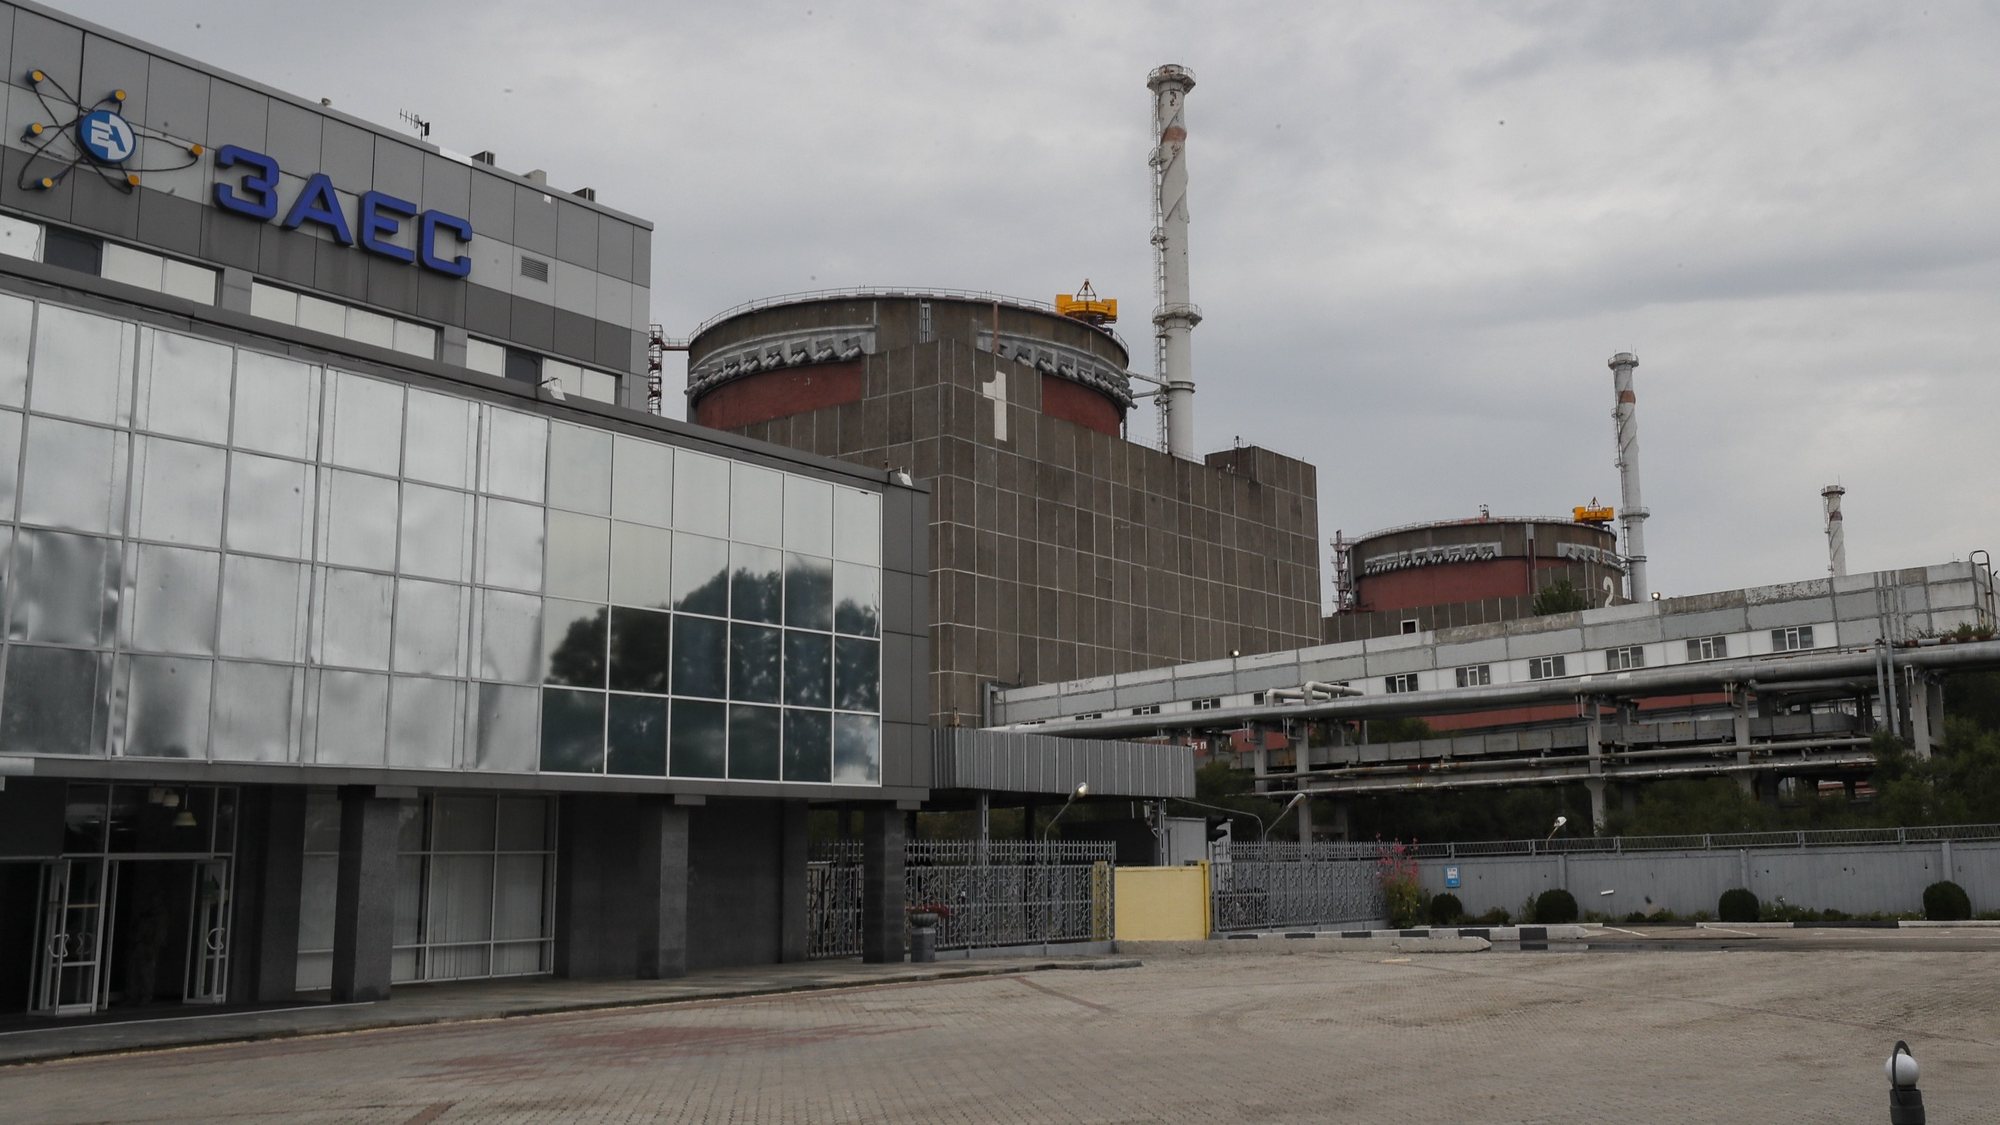 epa10153150 A picture taken during a visit organised by the Russian military shows a view of the Zaporizhzhia Nuclear Power Plant in Enerhodar, southeastern Ukraine, 01 September 2022. During several hours of work at the Zaporizhzhia  NPP, the IAEA mission received key information about the situation at the nuclear power plant with explanations from the personnel, said Rafael Grossi, head of the IAEA delegation. Zaporizhzhia Nuclear Power Plant in Enerhodar is the largest nuclear power plant in Europe with six power units. The first was put into operation in December 1984, the sixth in October 1995. According to the authorities, recently only the fifth and sixth power units have been operating at 60 percent and 80 percent, respectively, including ongoing supplies to Ukraine.  EPA/YURI KOCHETKOV